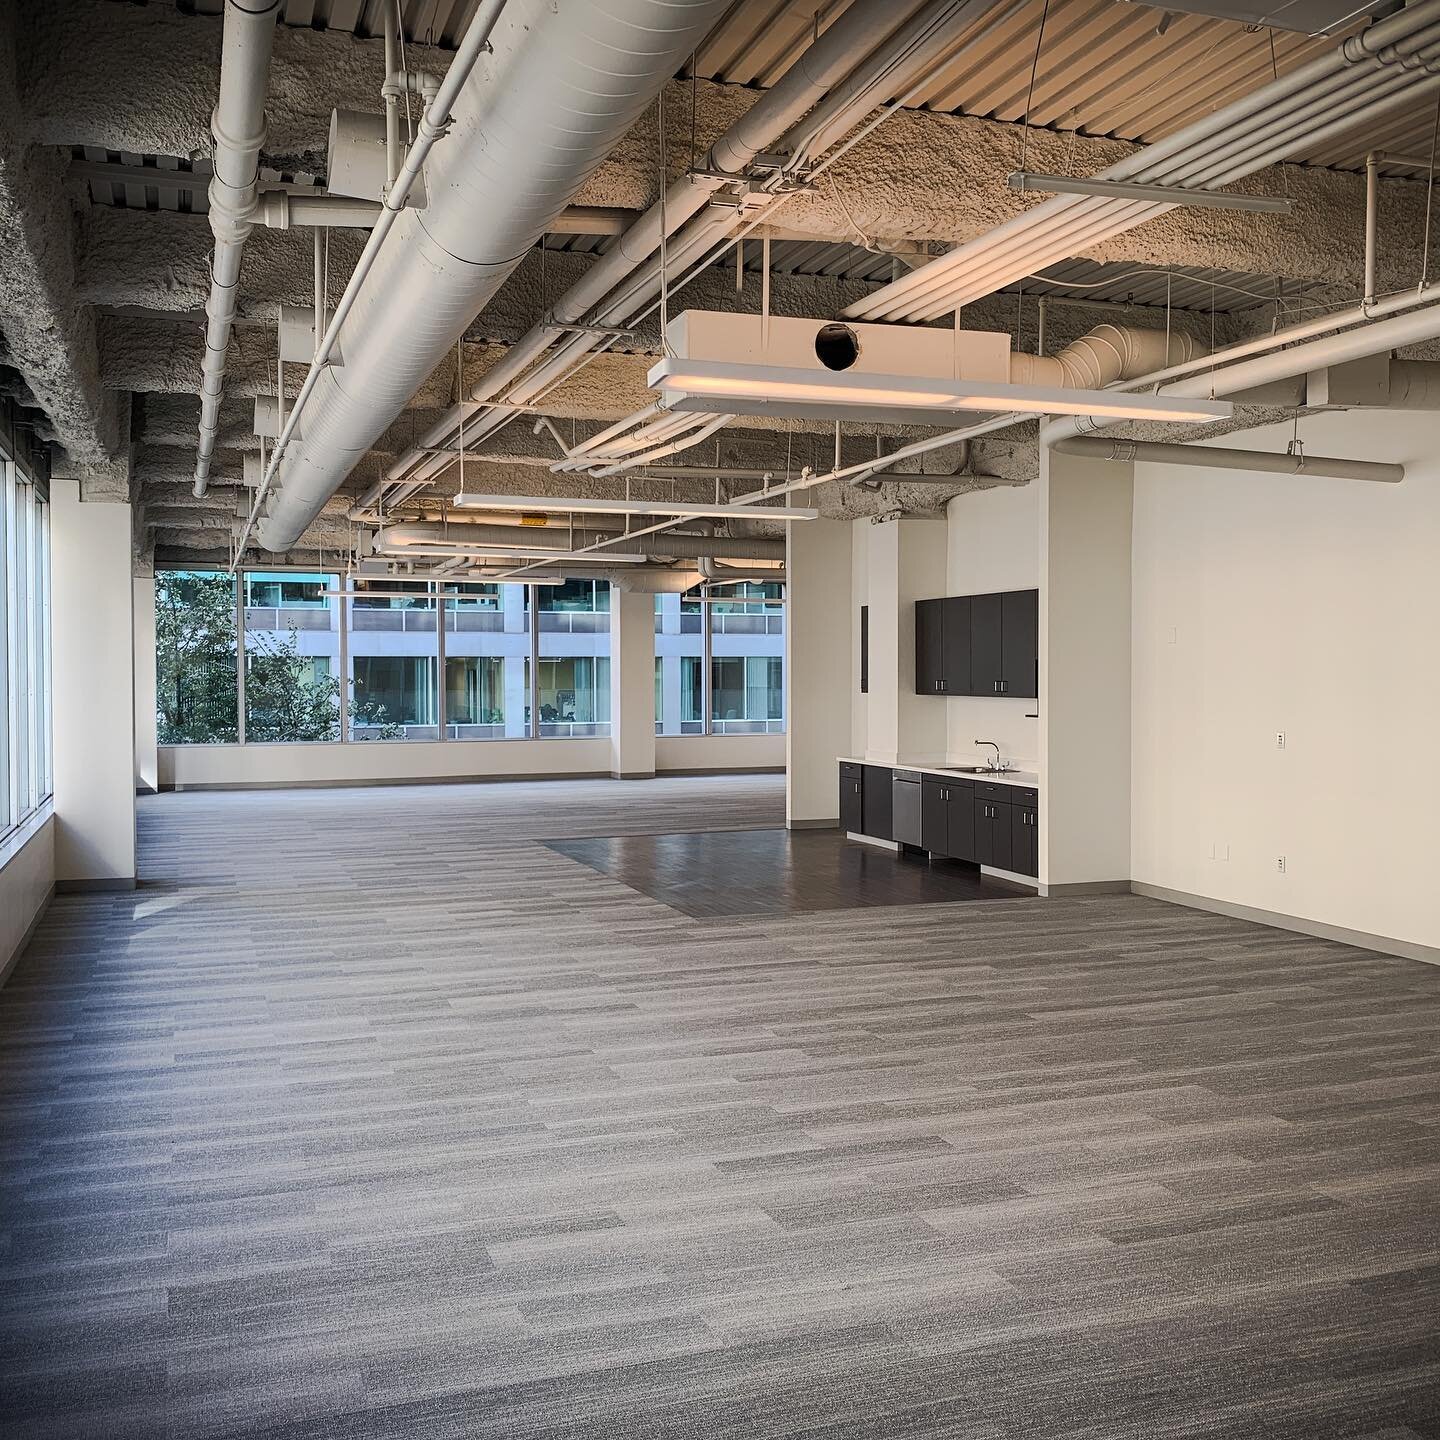 Completed 4 Suites at Aspect #portland thank you to @rhconstco for inviting us to be a part of this project! @ankrommoisan @steelwavellc #commercialpainting @millerpaint #portland